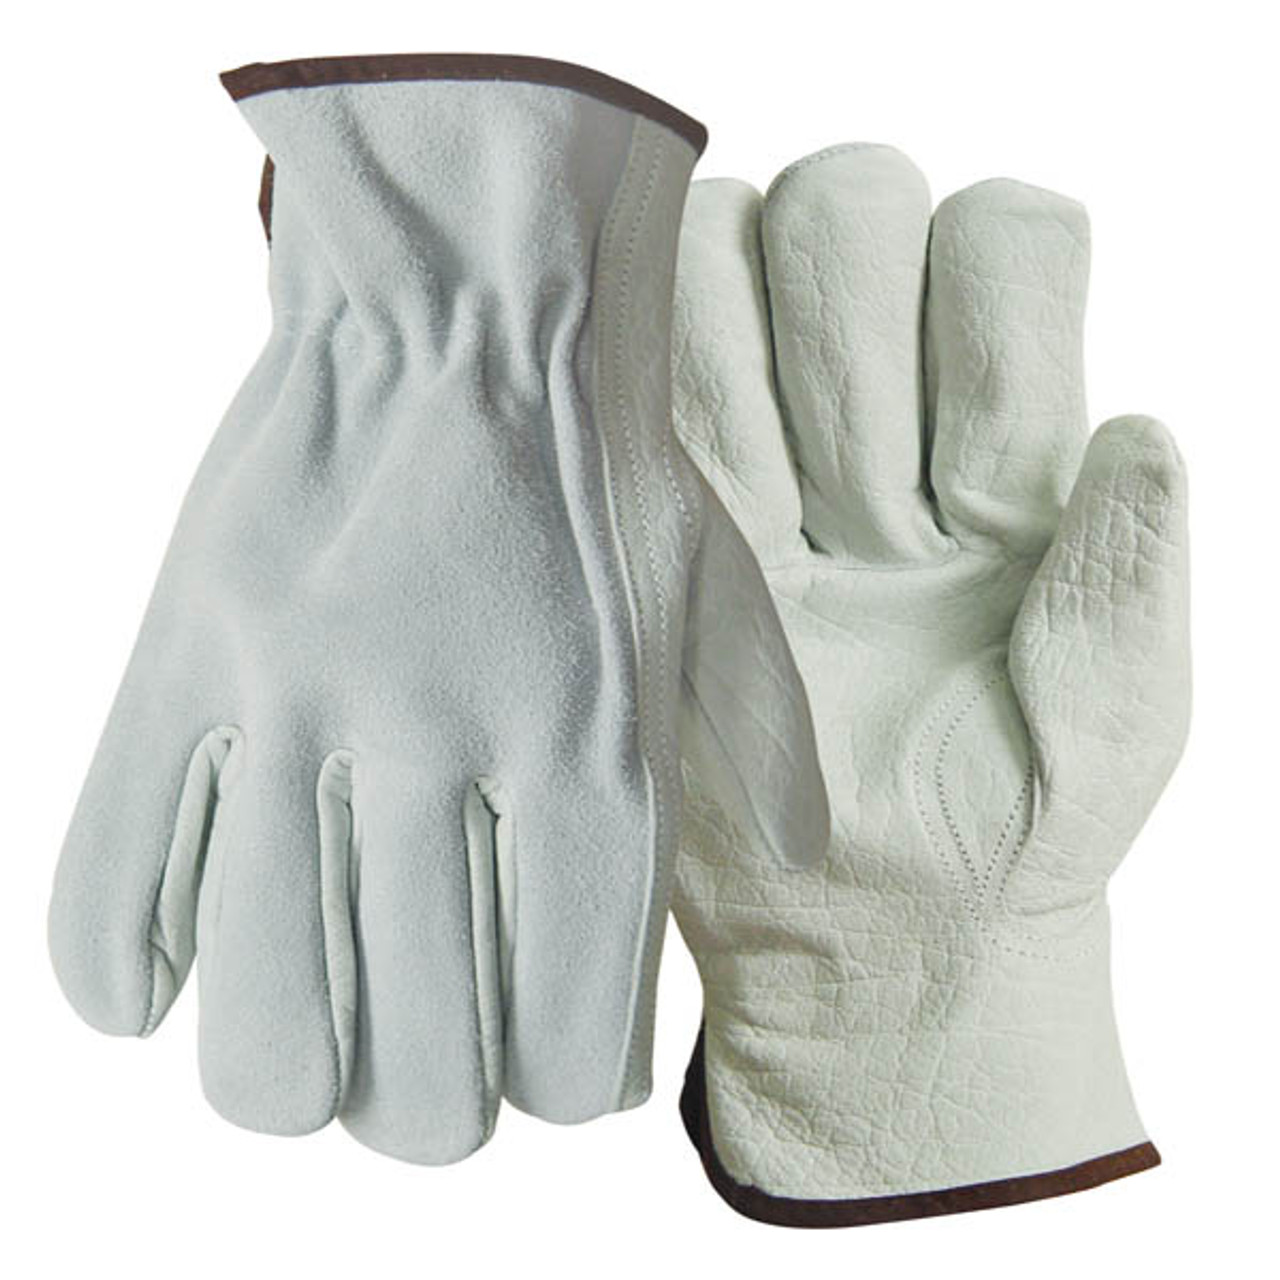 Wells Lamont Men's Cowhide Leather Work Gloves